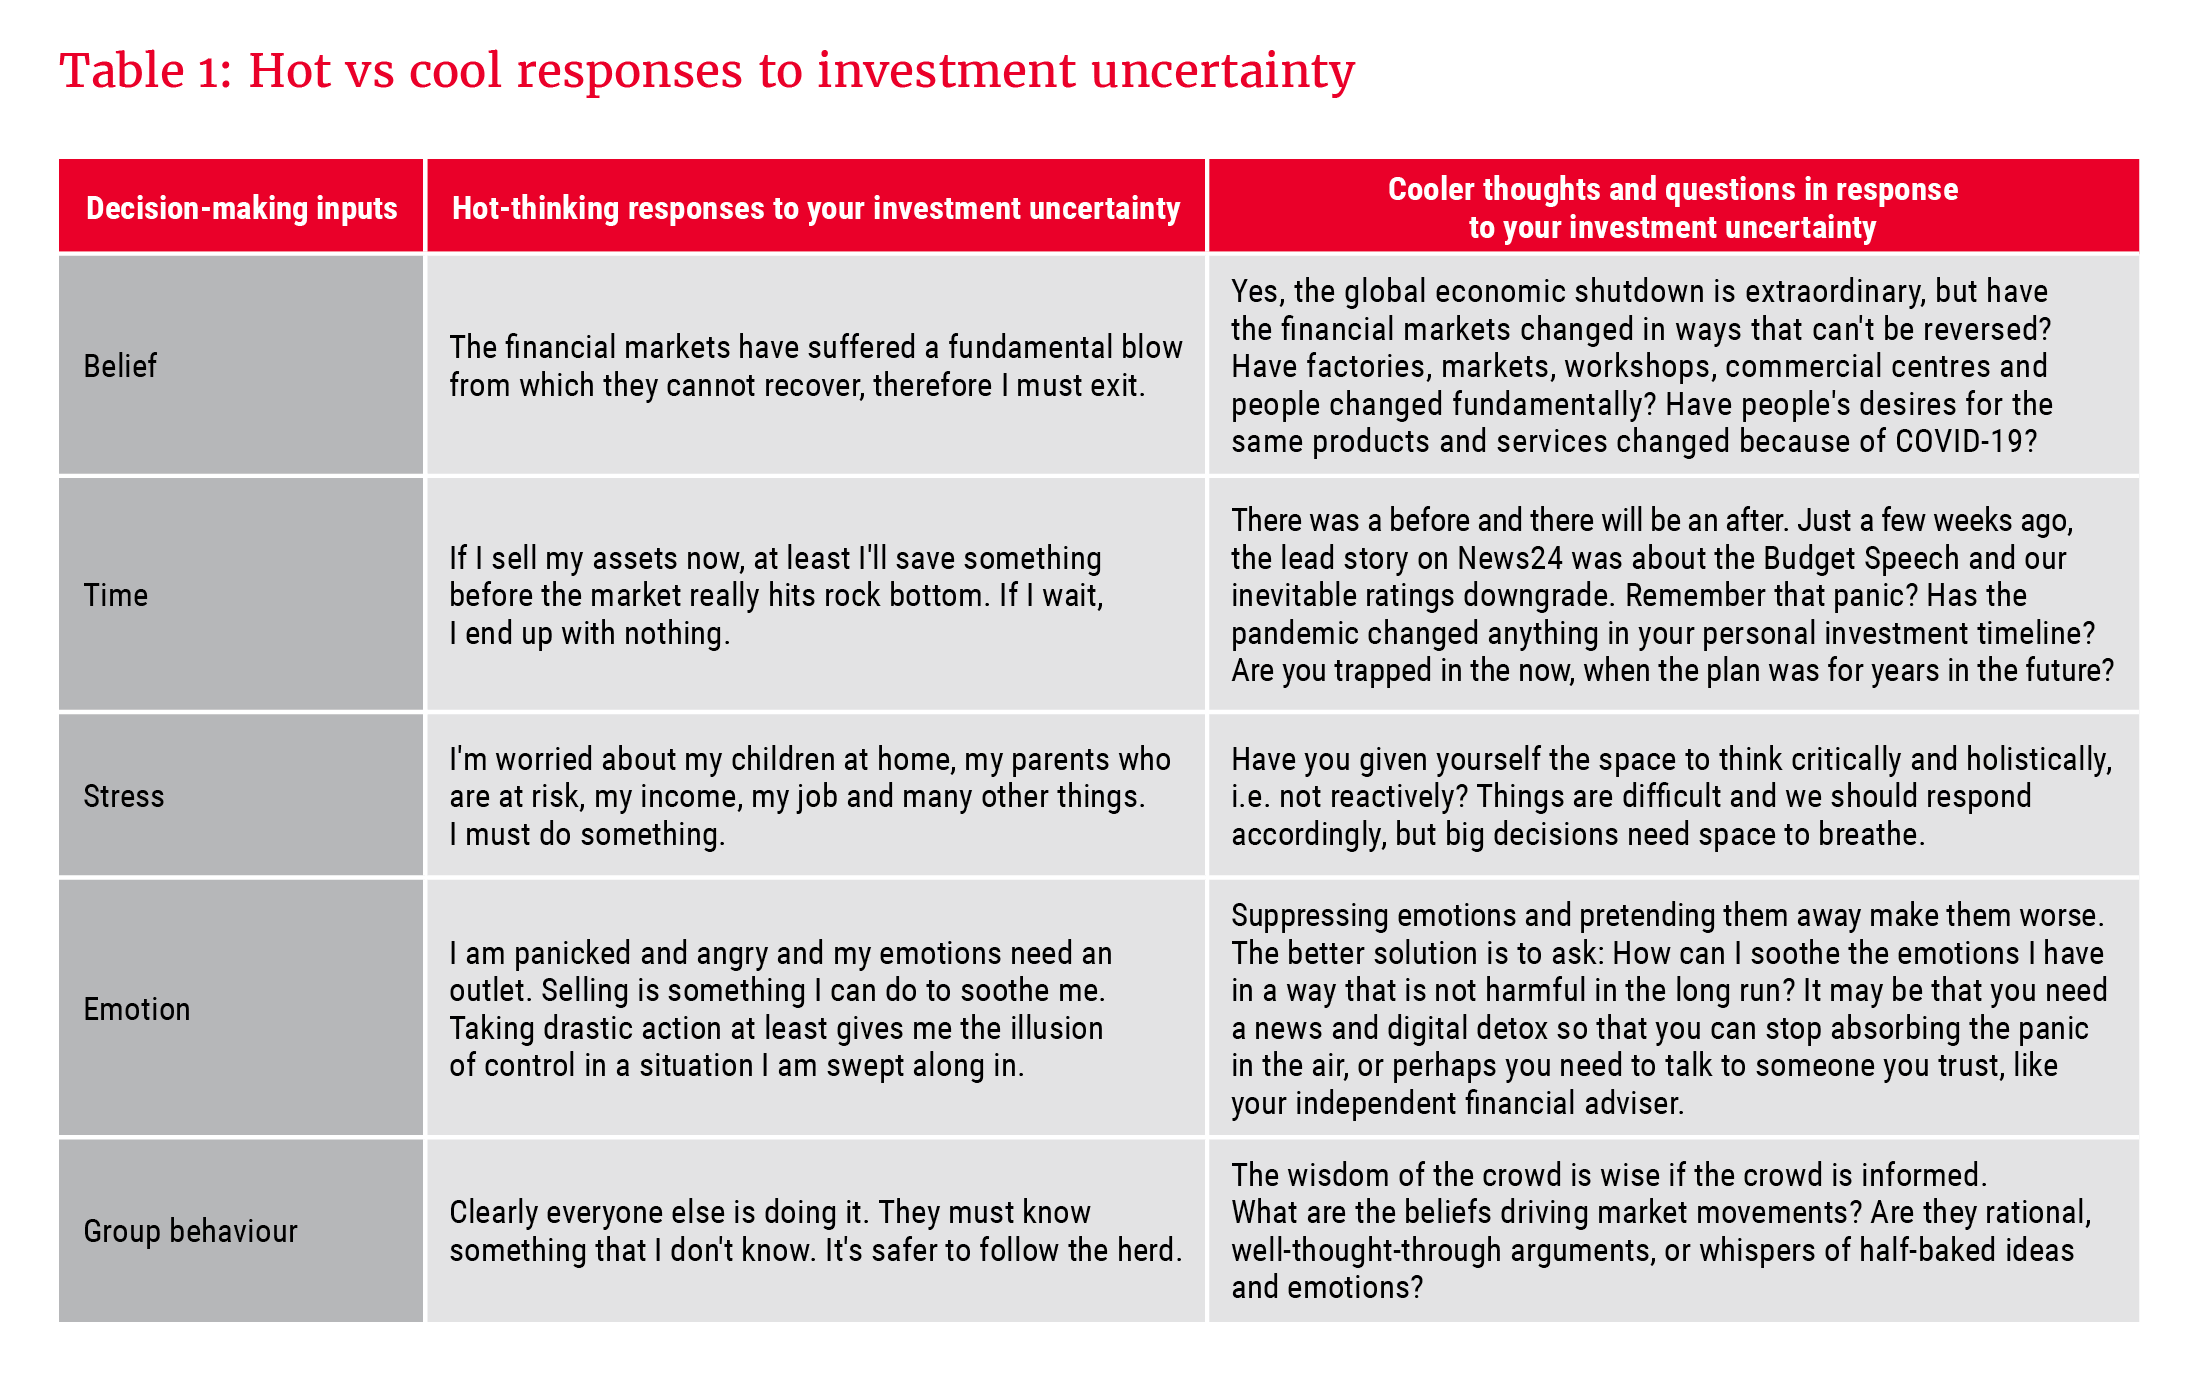 Hot vs cool responses to investment uncertainty - Allan Gray